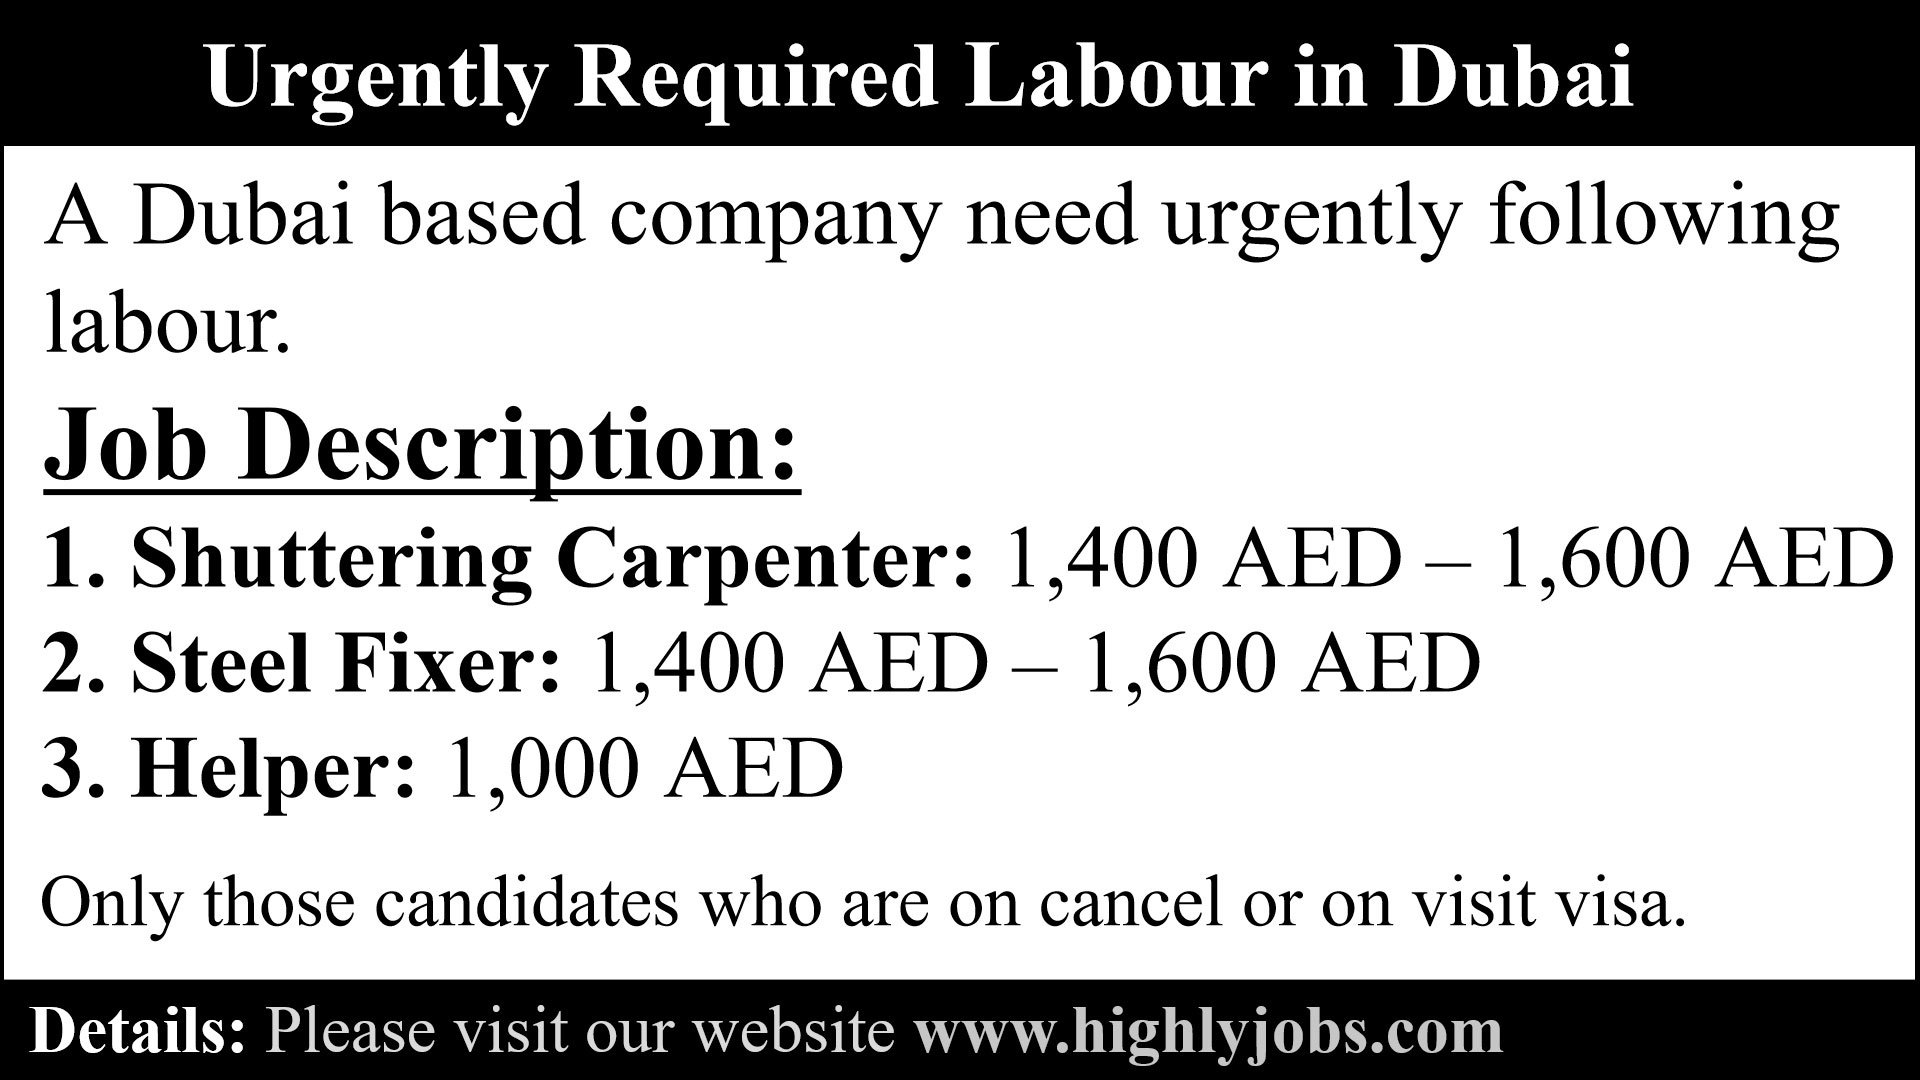 Urgently Required Labour in Dubai